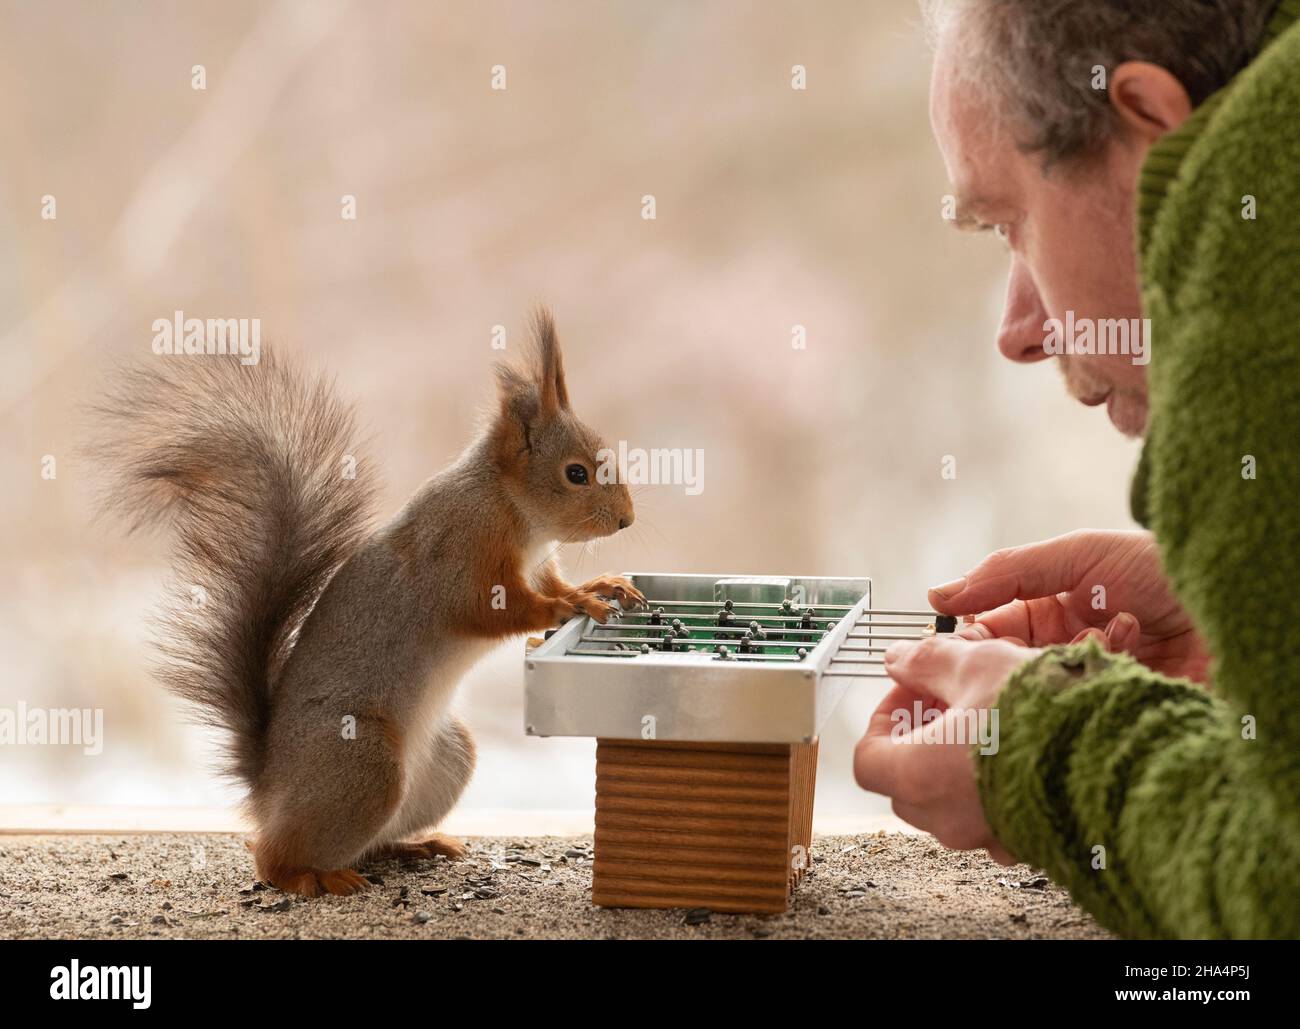 red squirrel and man playing a soccer game Stock Photo